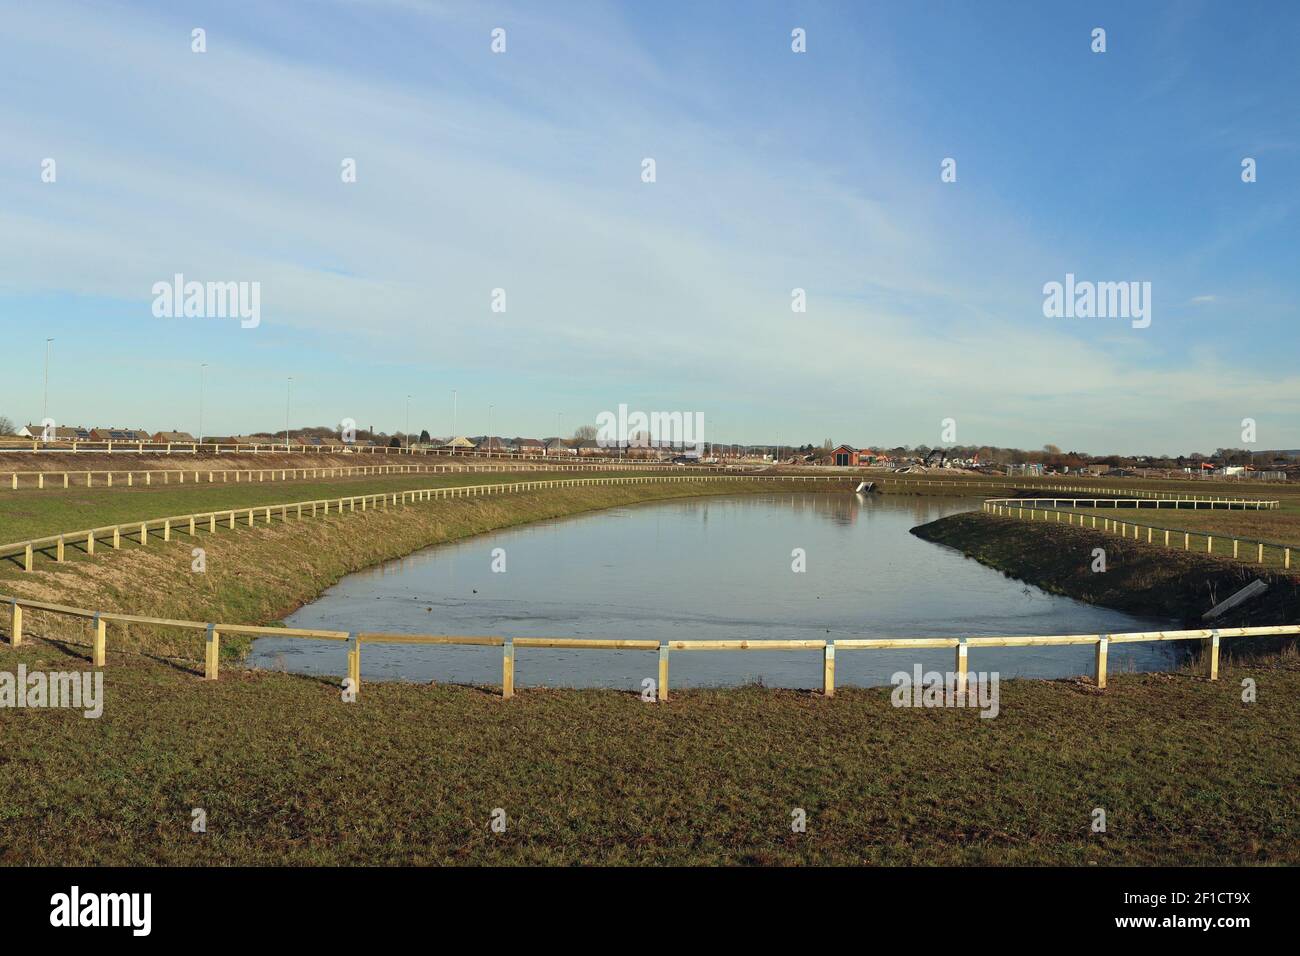 New drainage pond on the former airfield in Burscough which is gradually being repurposed as an industrial estate, 11.2.2021 Stock Photo